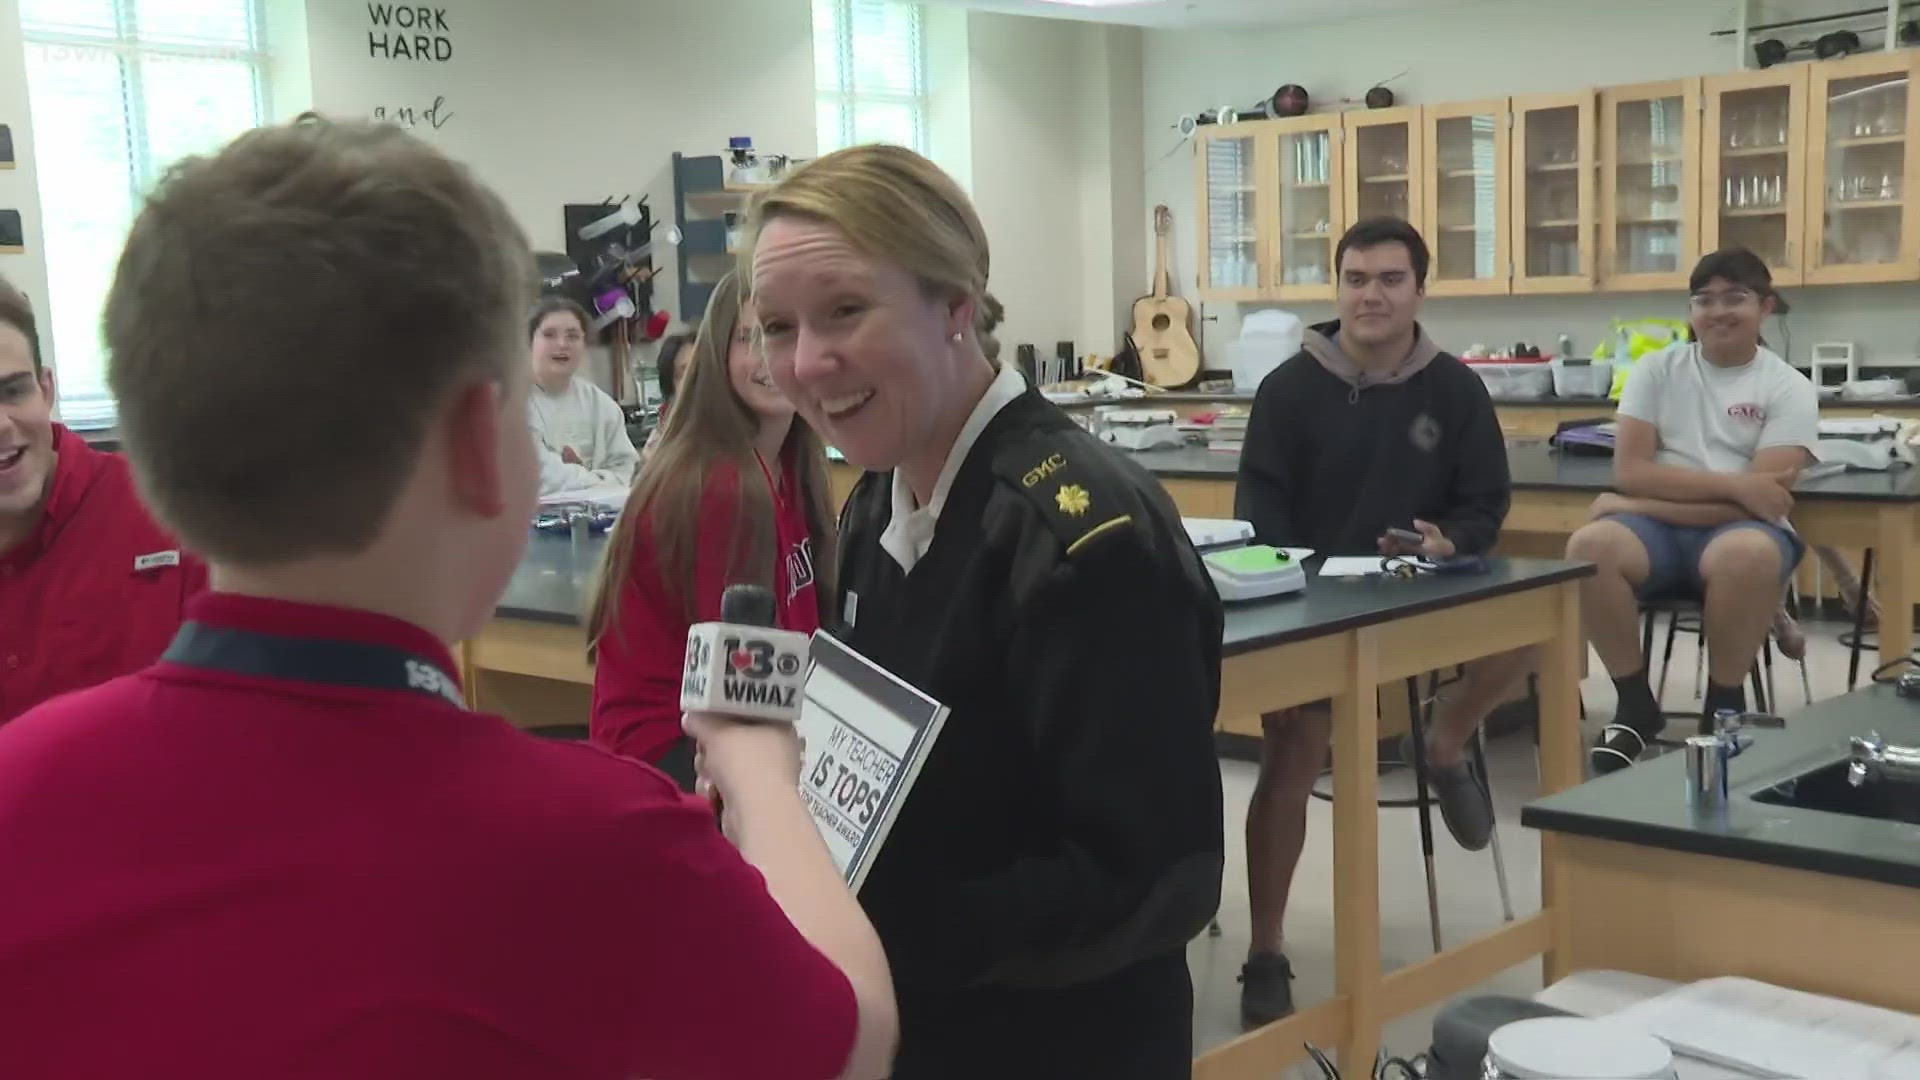 She's a science teacher that has no problem creating chemistry between her and her students.